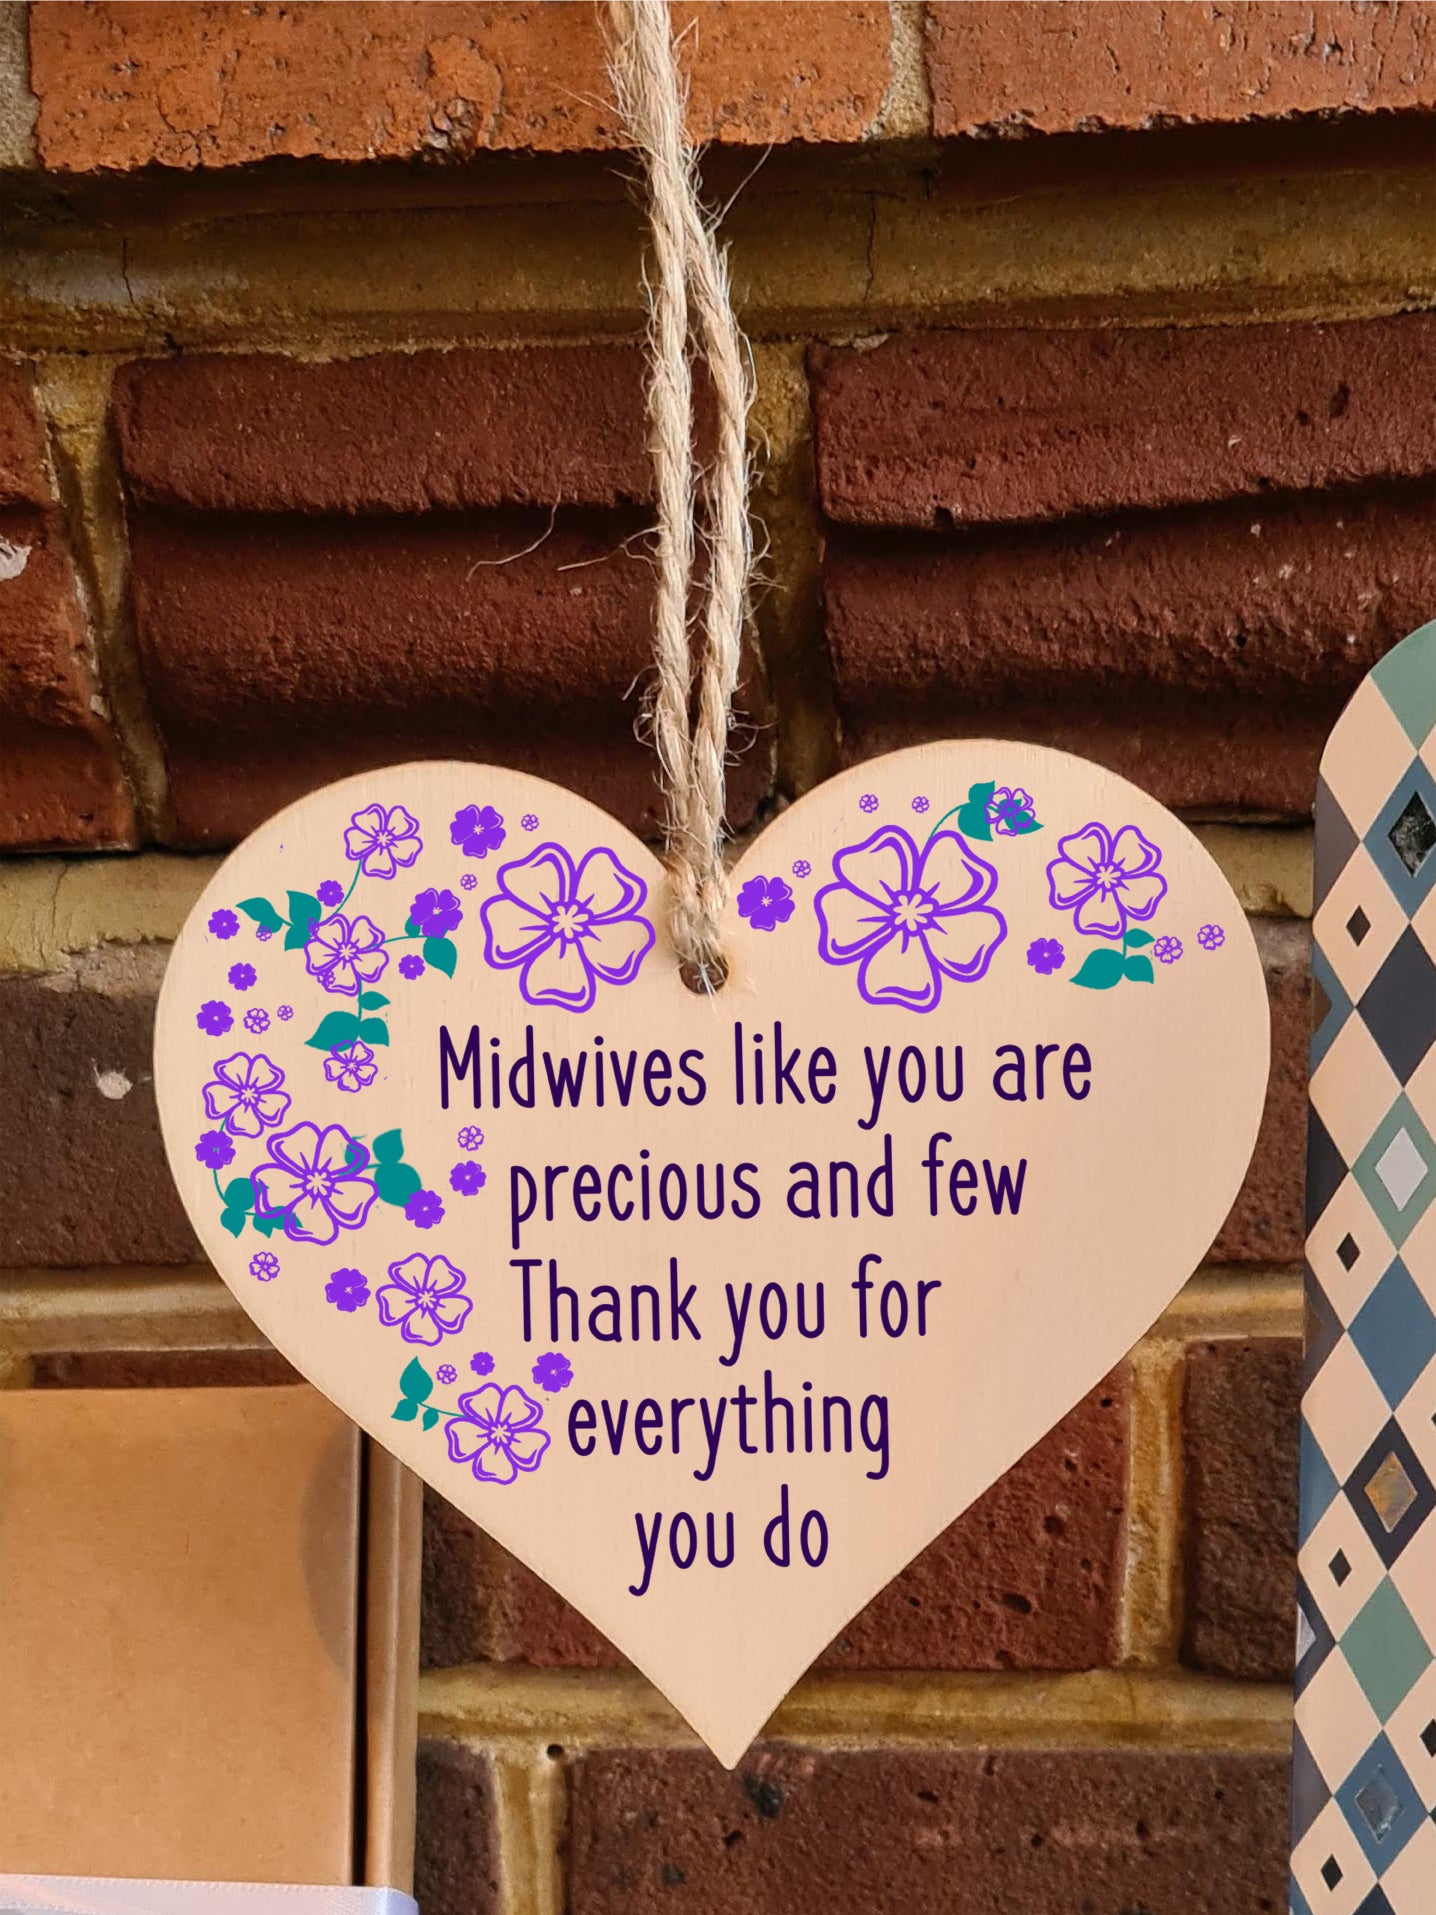 Handmade Wooden Hanging Heart Plaque Gift for a Great Midwife Loving Thoughtful Thank You Keepsake